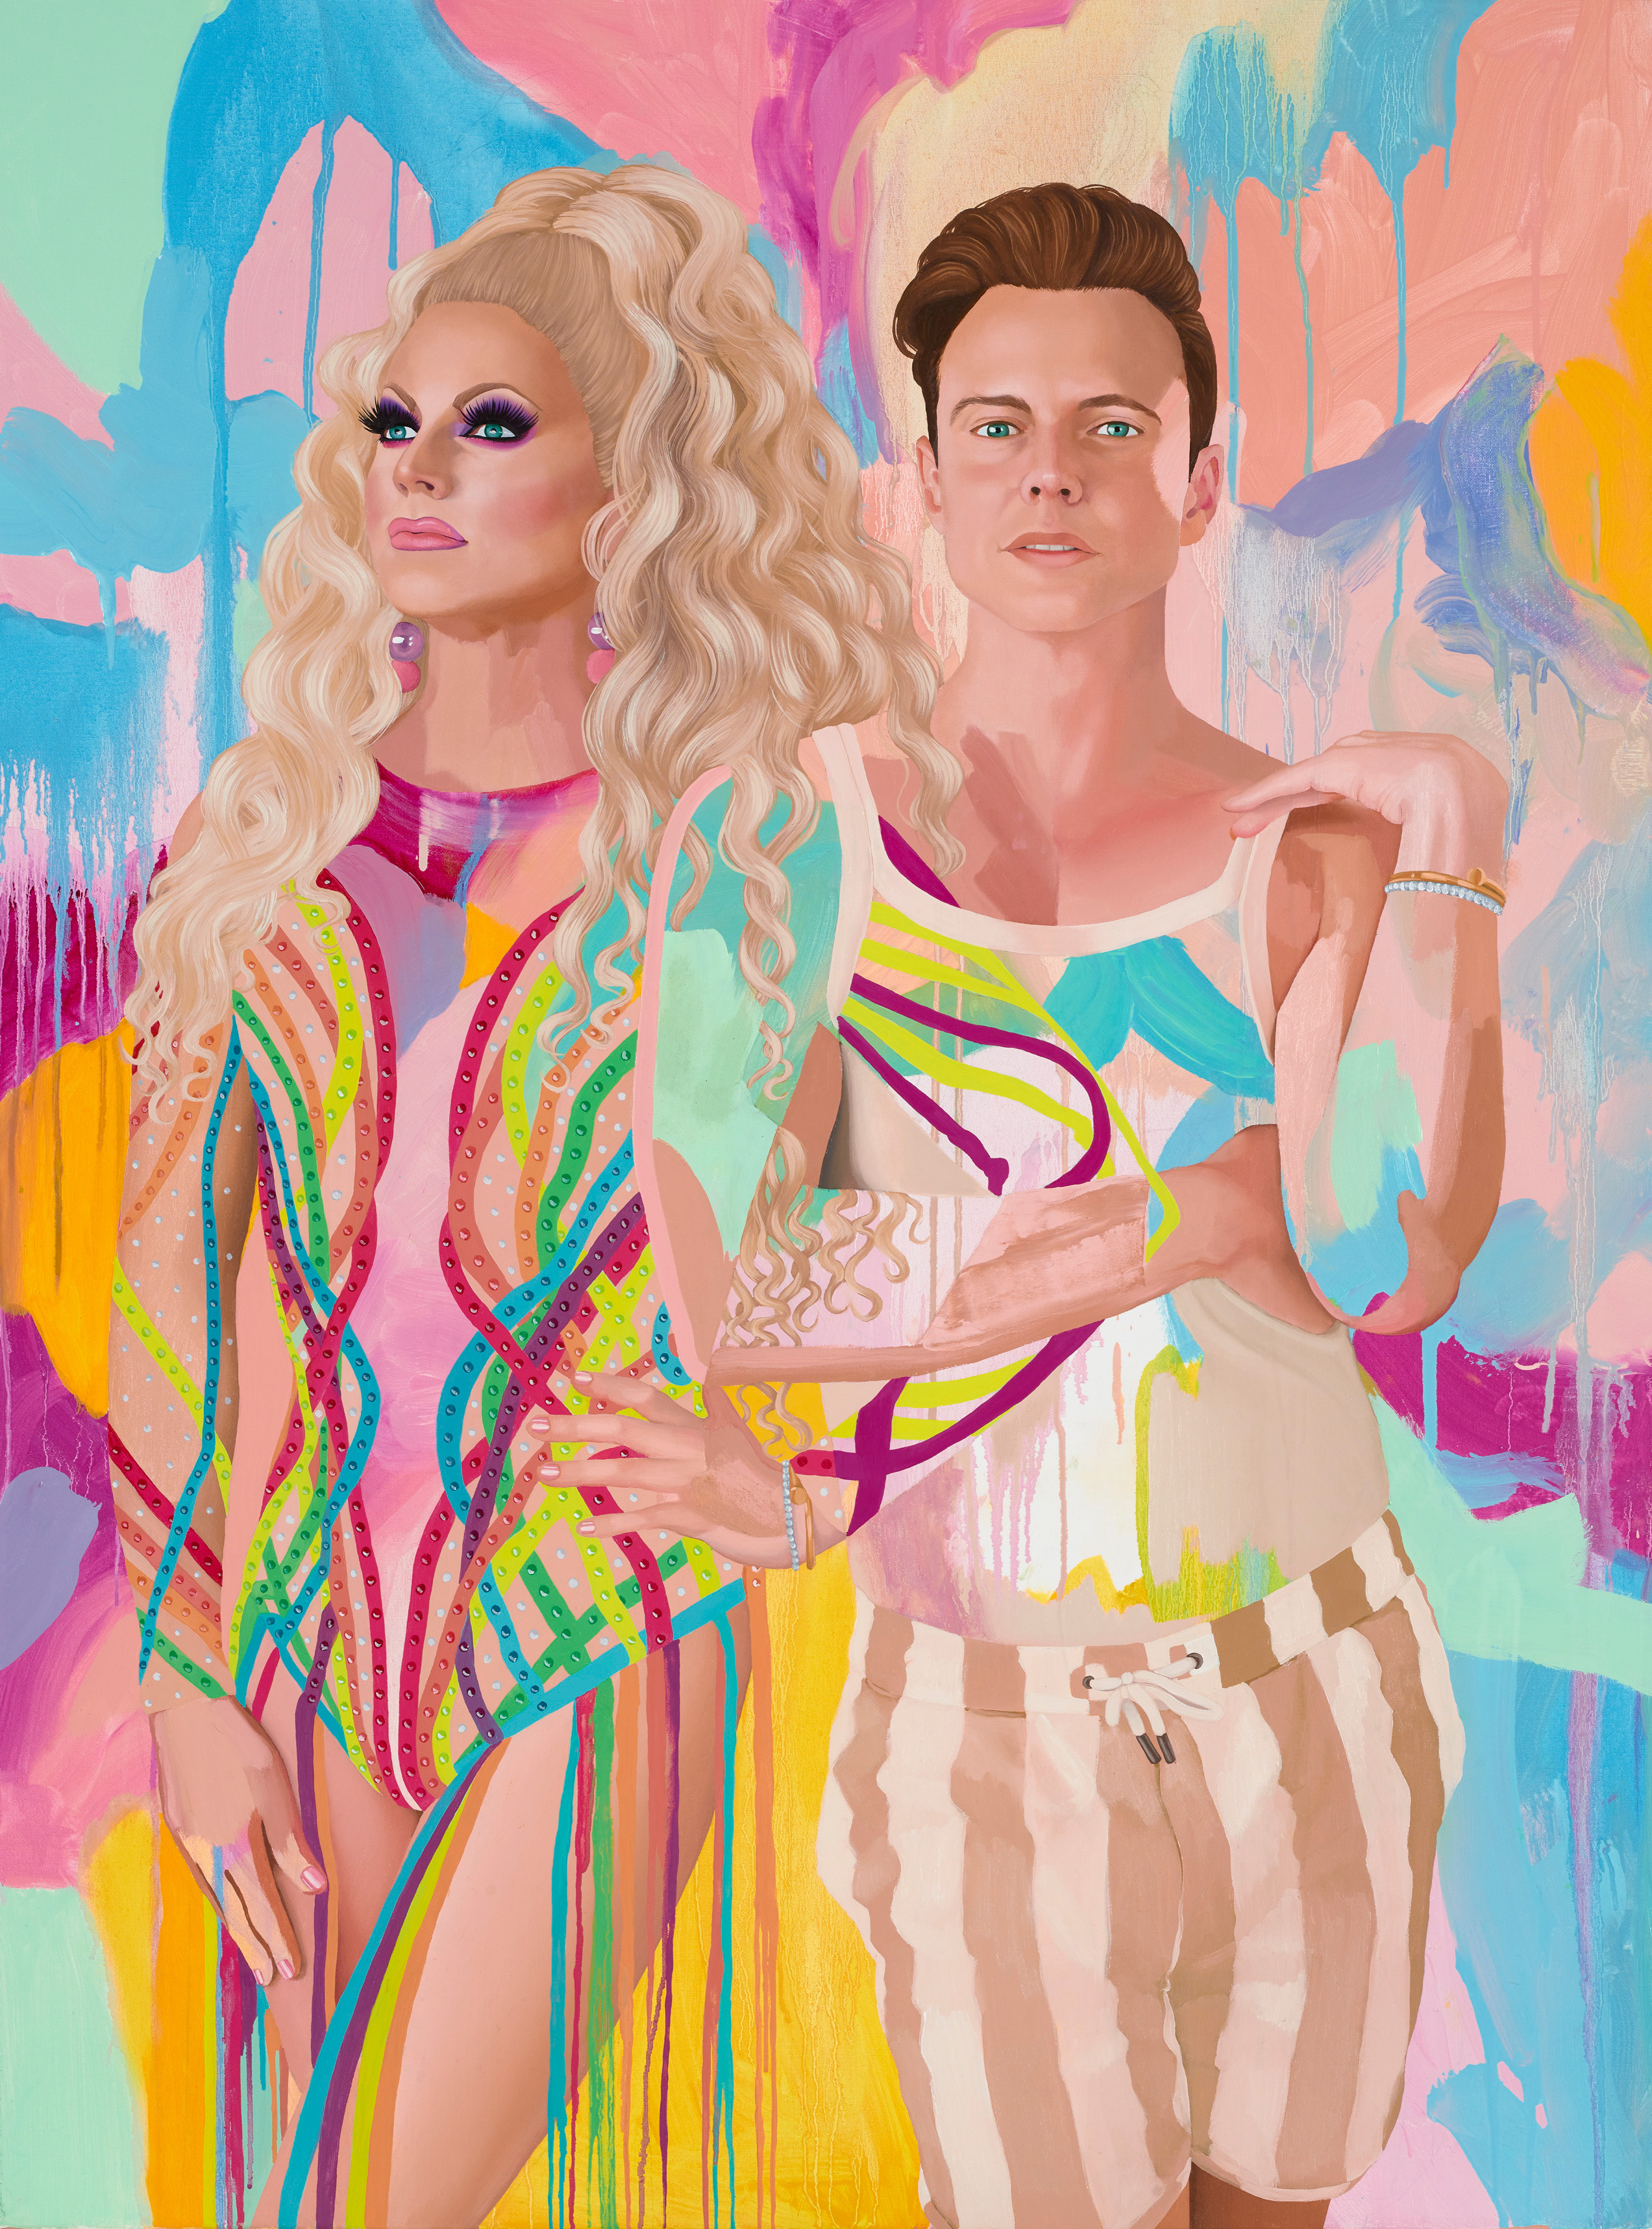 Portrait of Australian drag queen, singer and television personality Shane Jenek alongside alter ego Courtney Act  